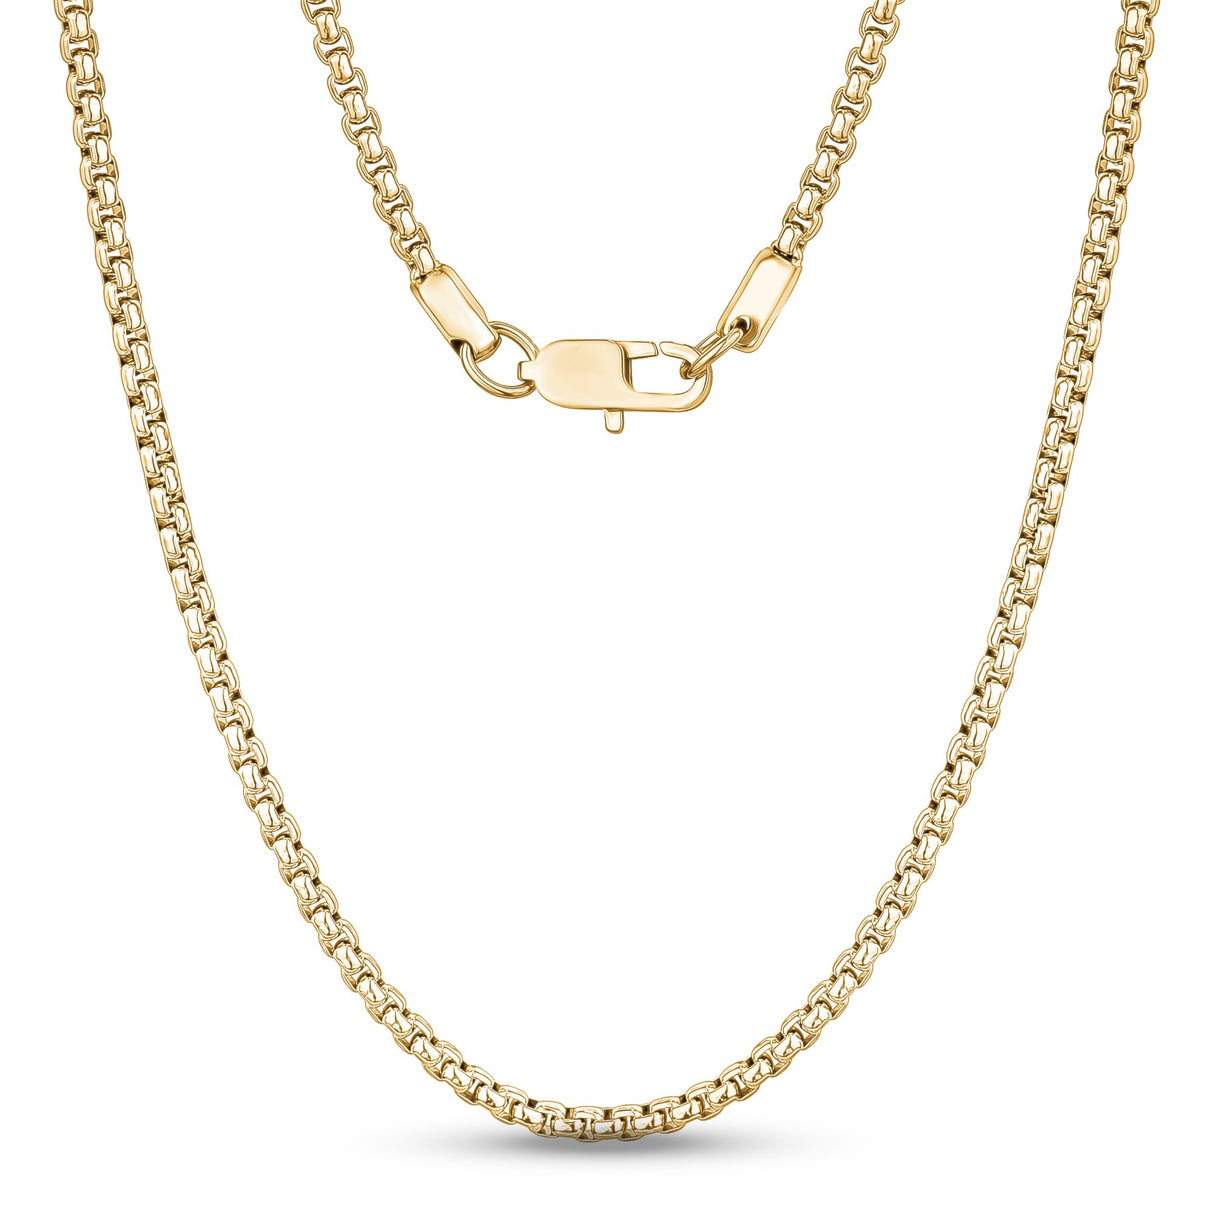 Mannen Ketting - 4mm Ronde Box Link Gold Steel Chain Necklace